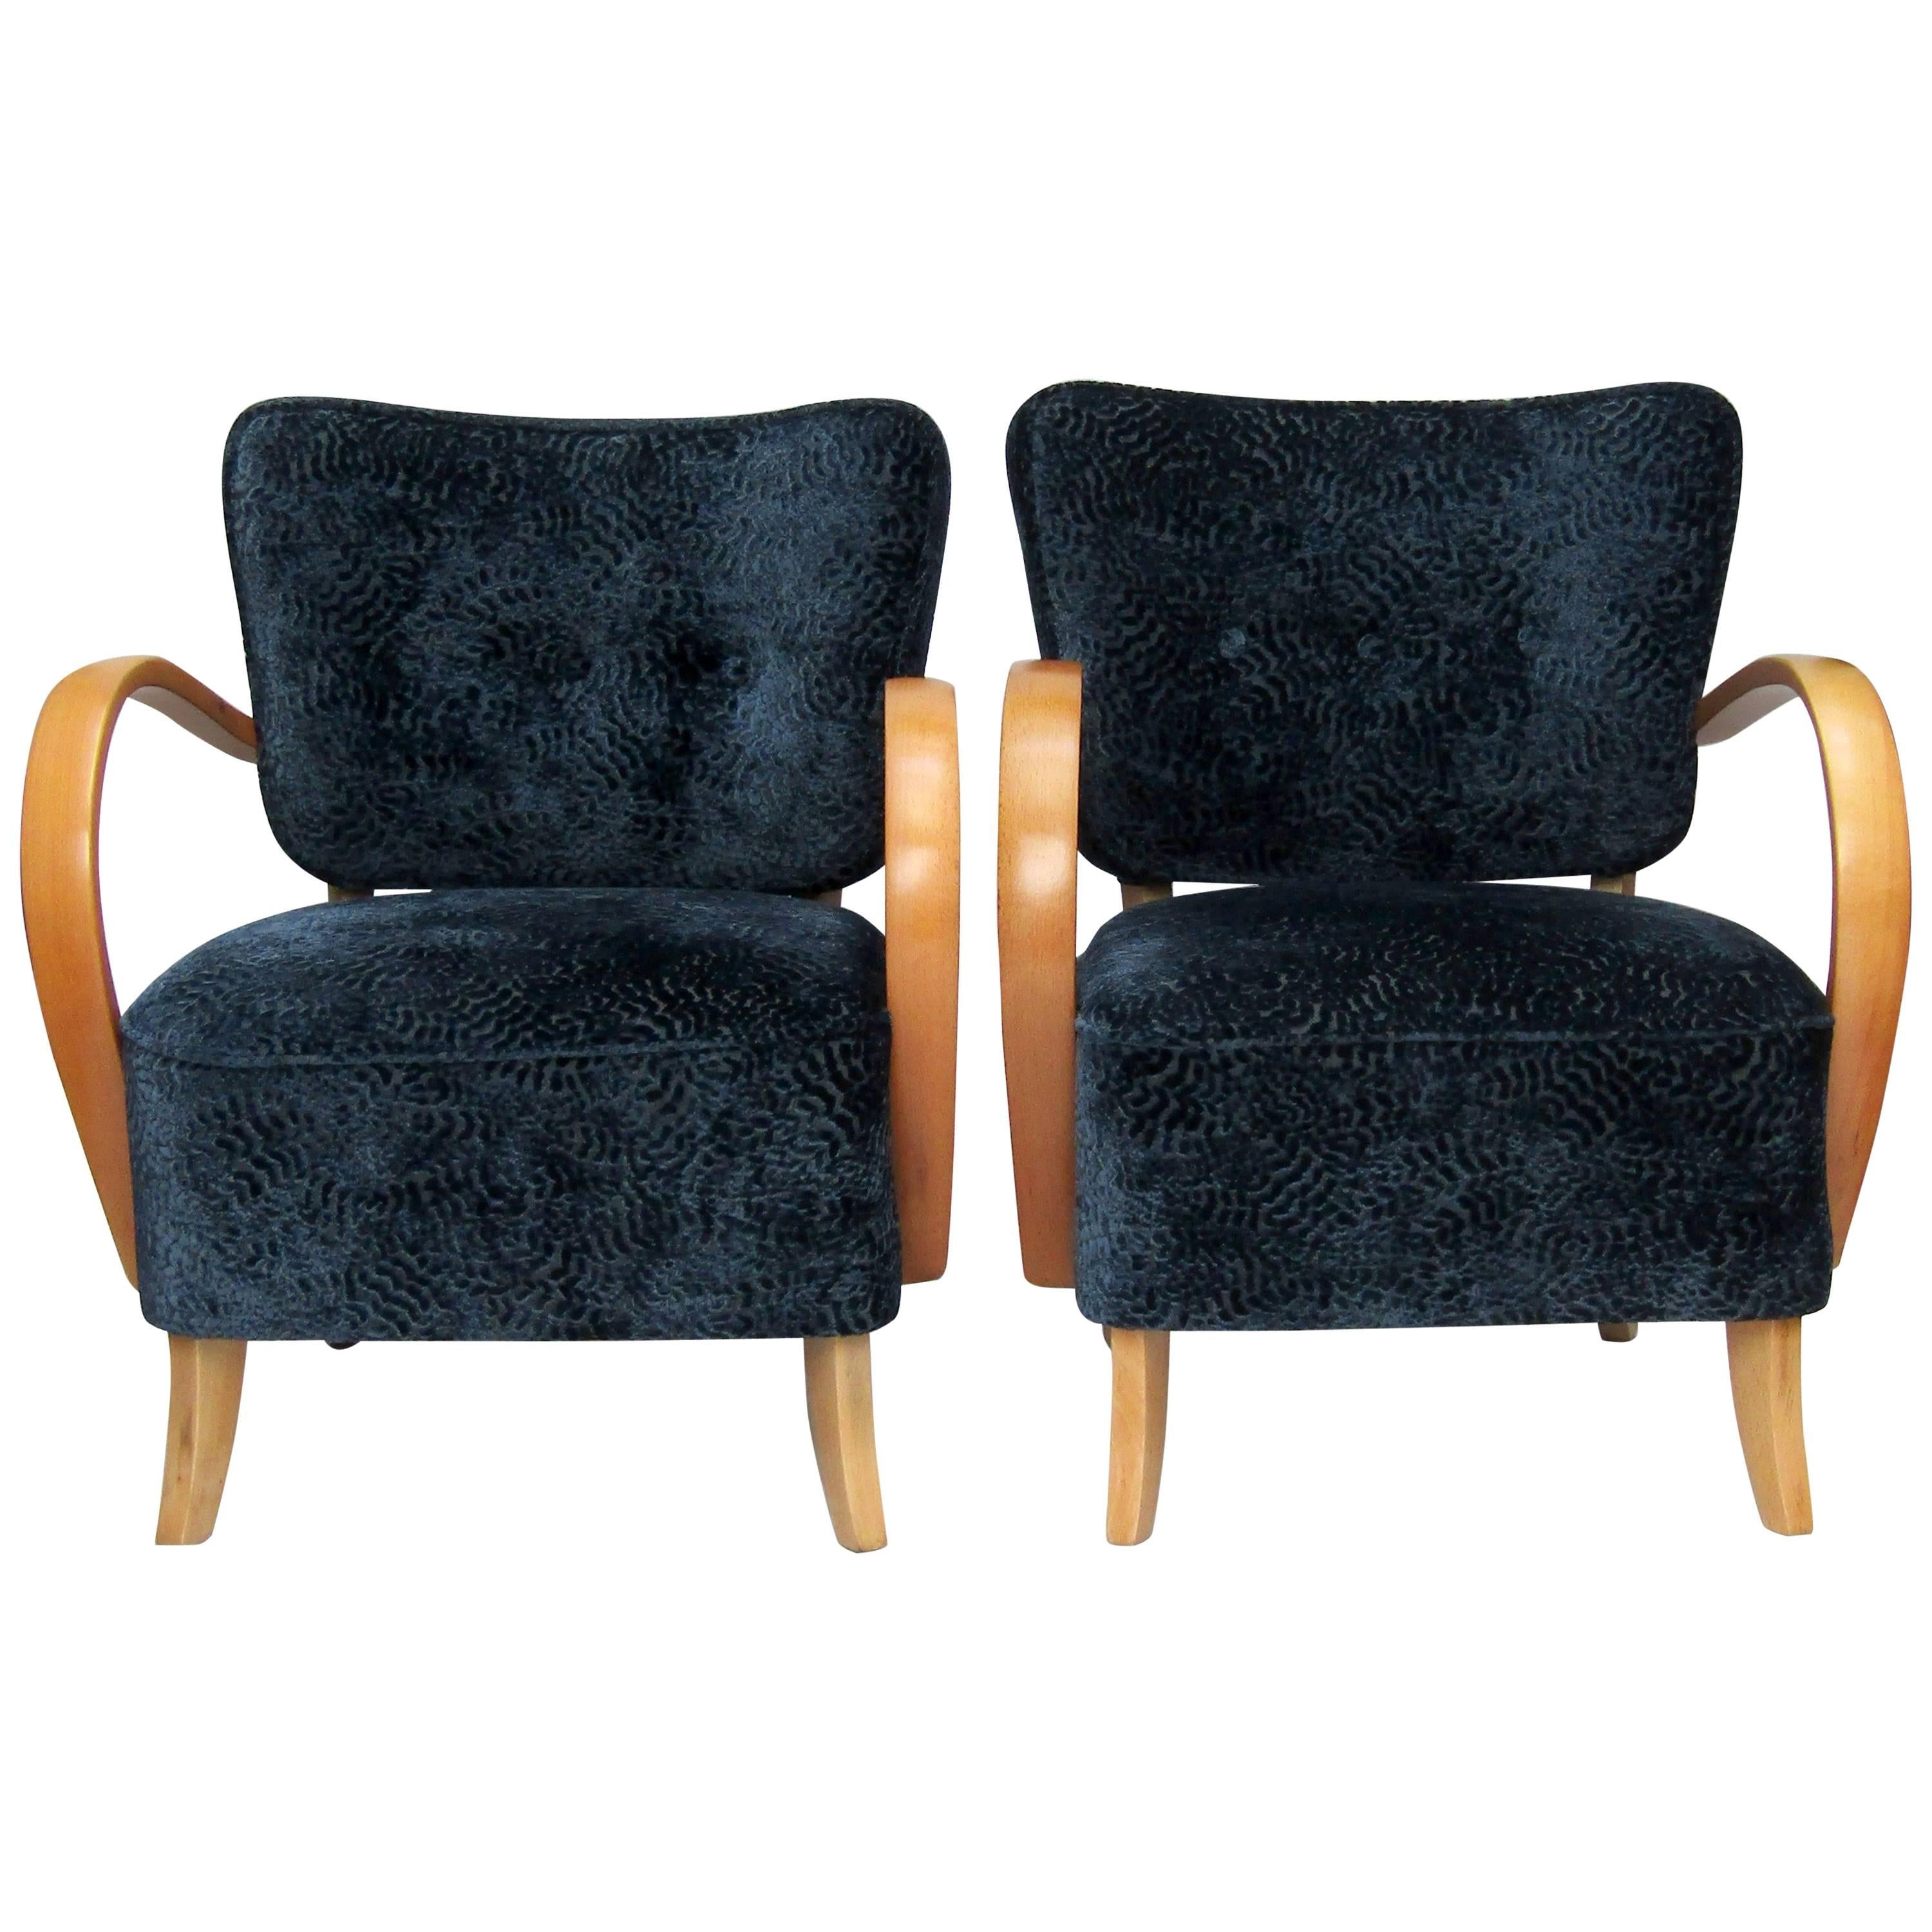 Pair of 1940s Bentwood Armchairs by Jindrich Halabala For Sale